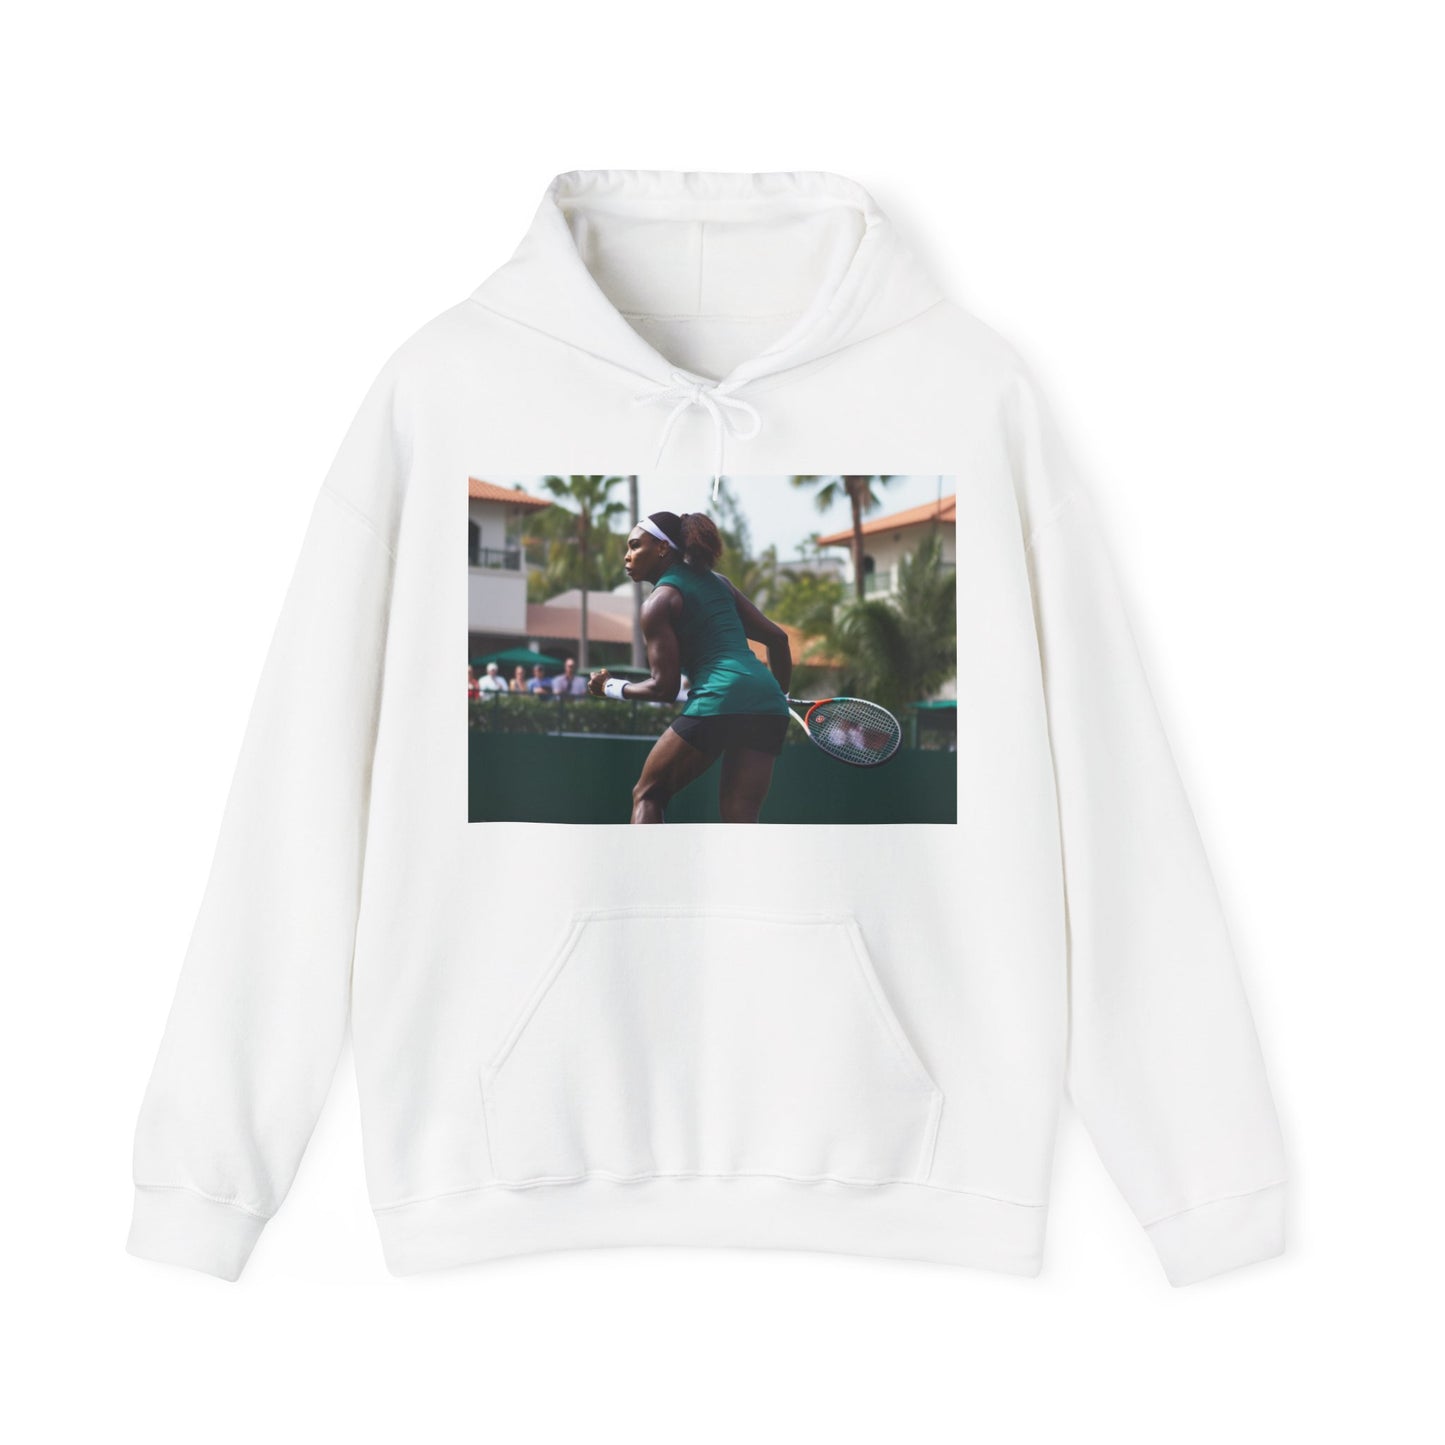 Copy of Serve and Volley Hoodie